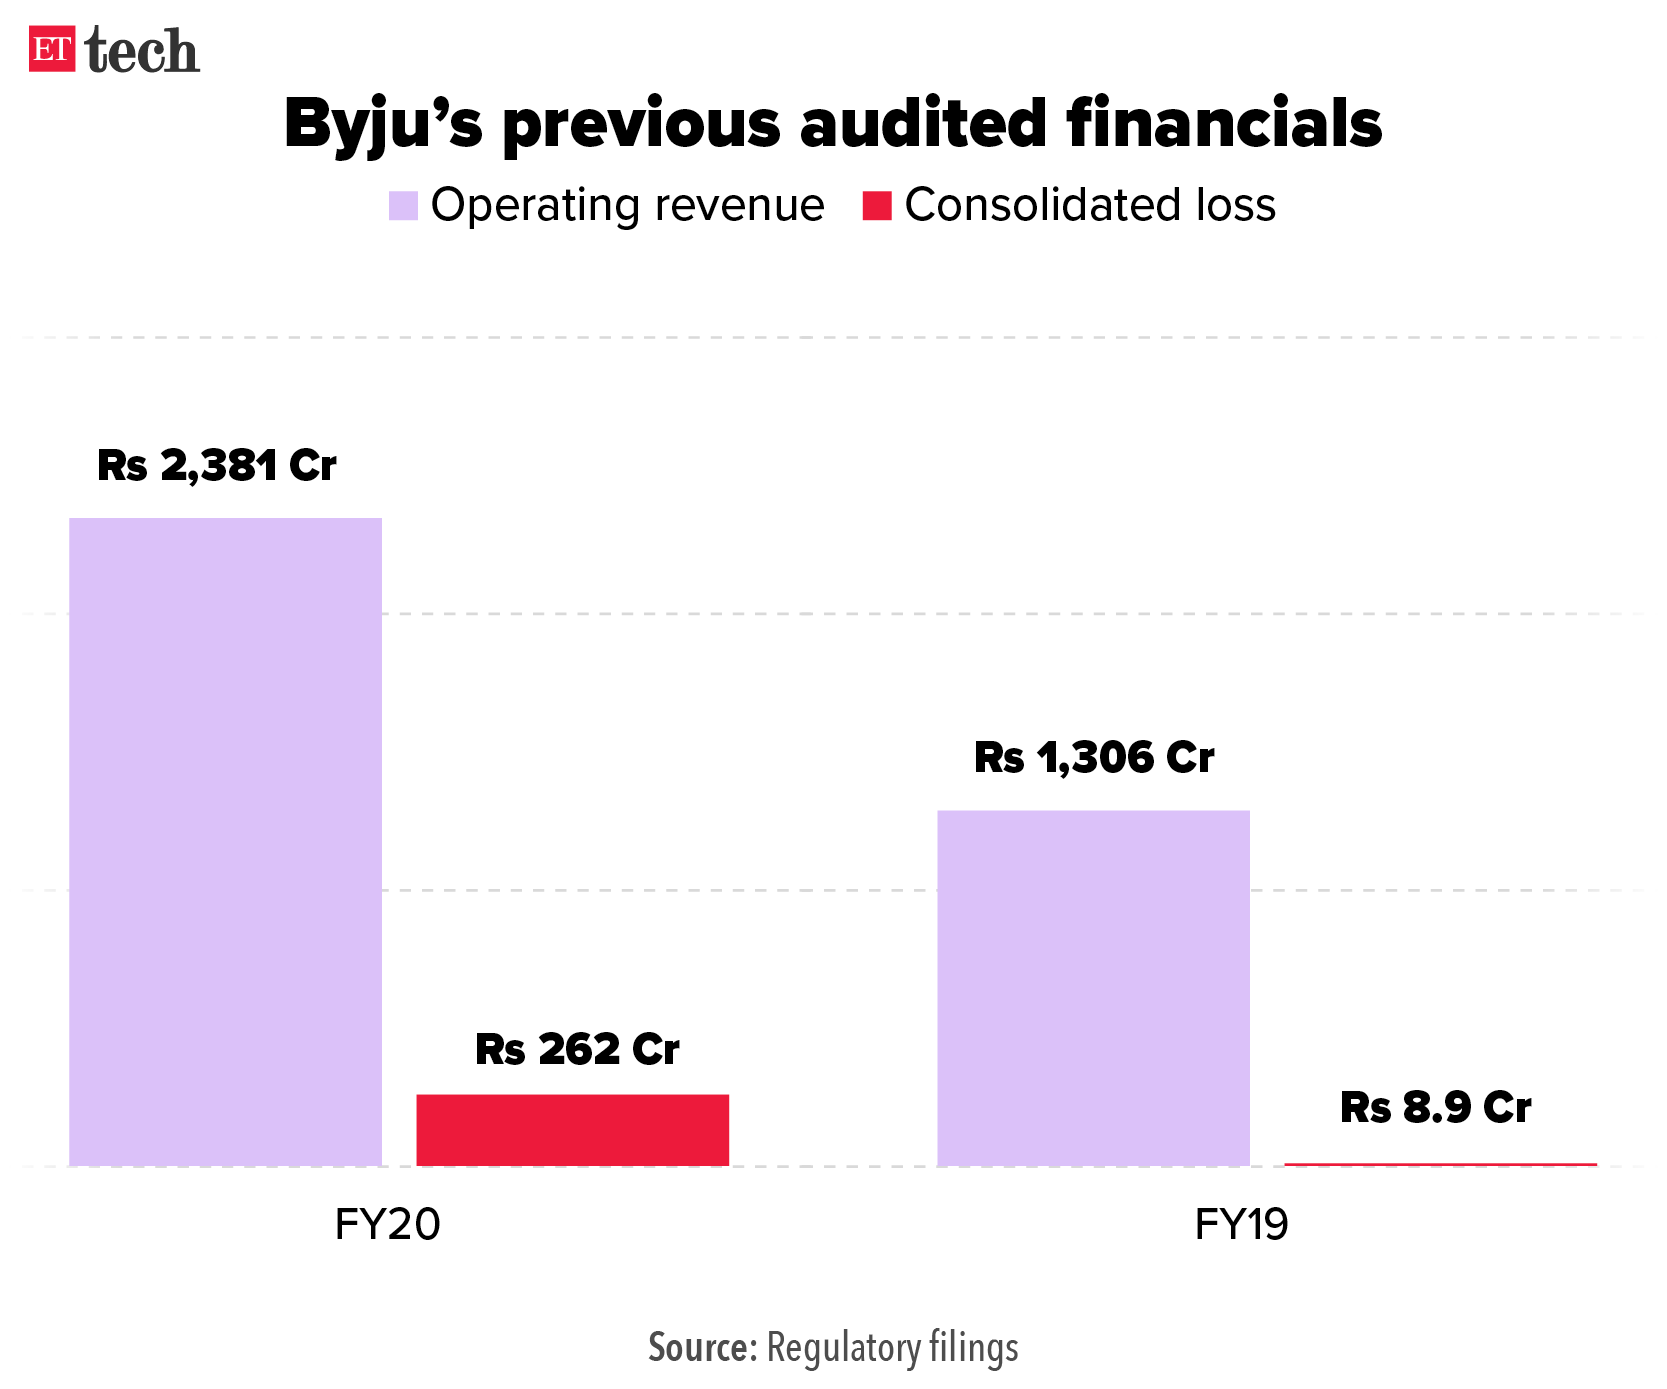 Byjus financials